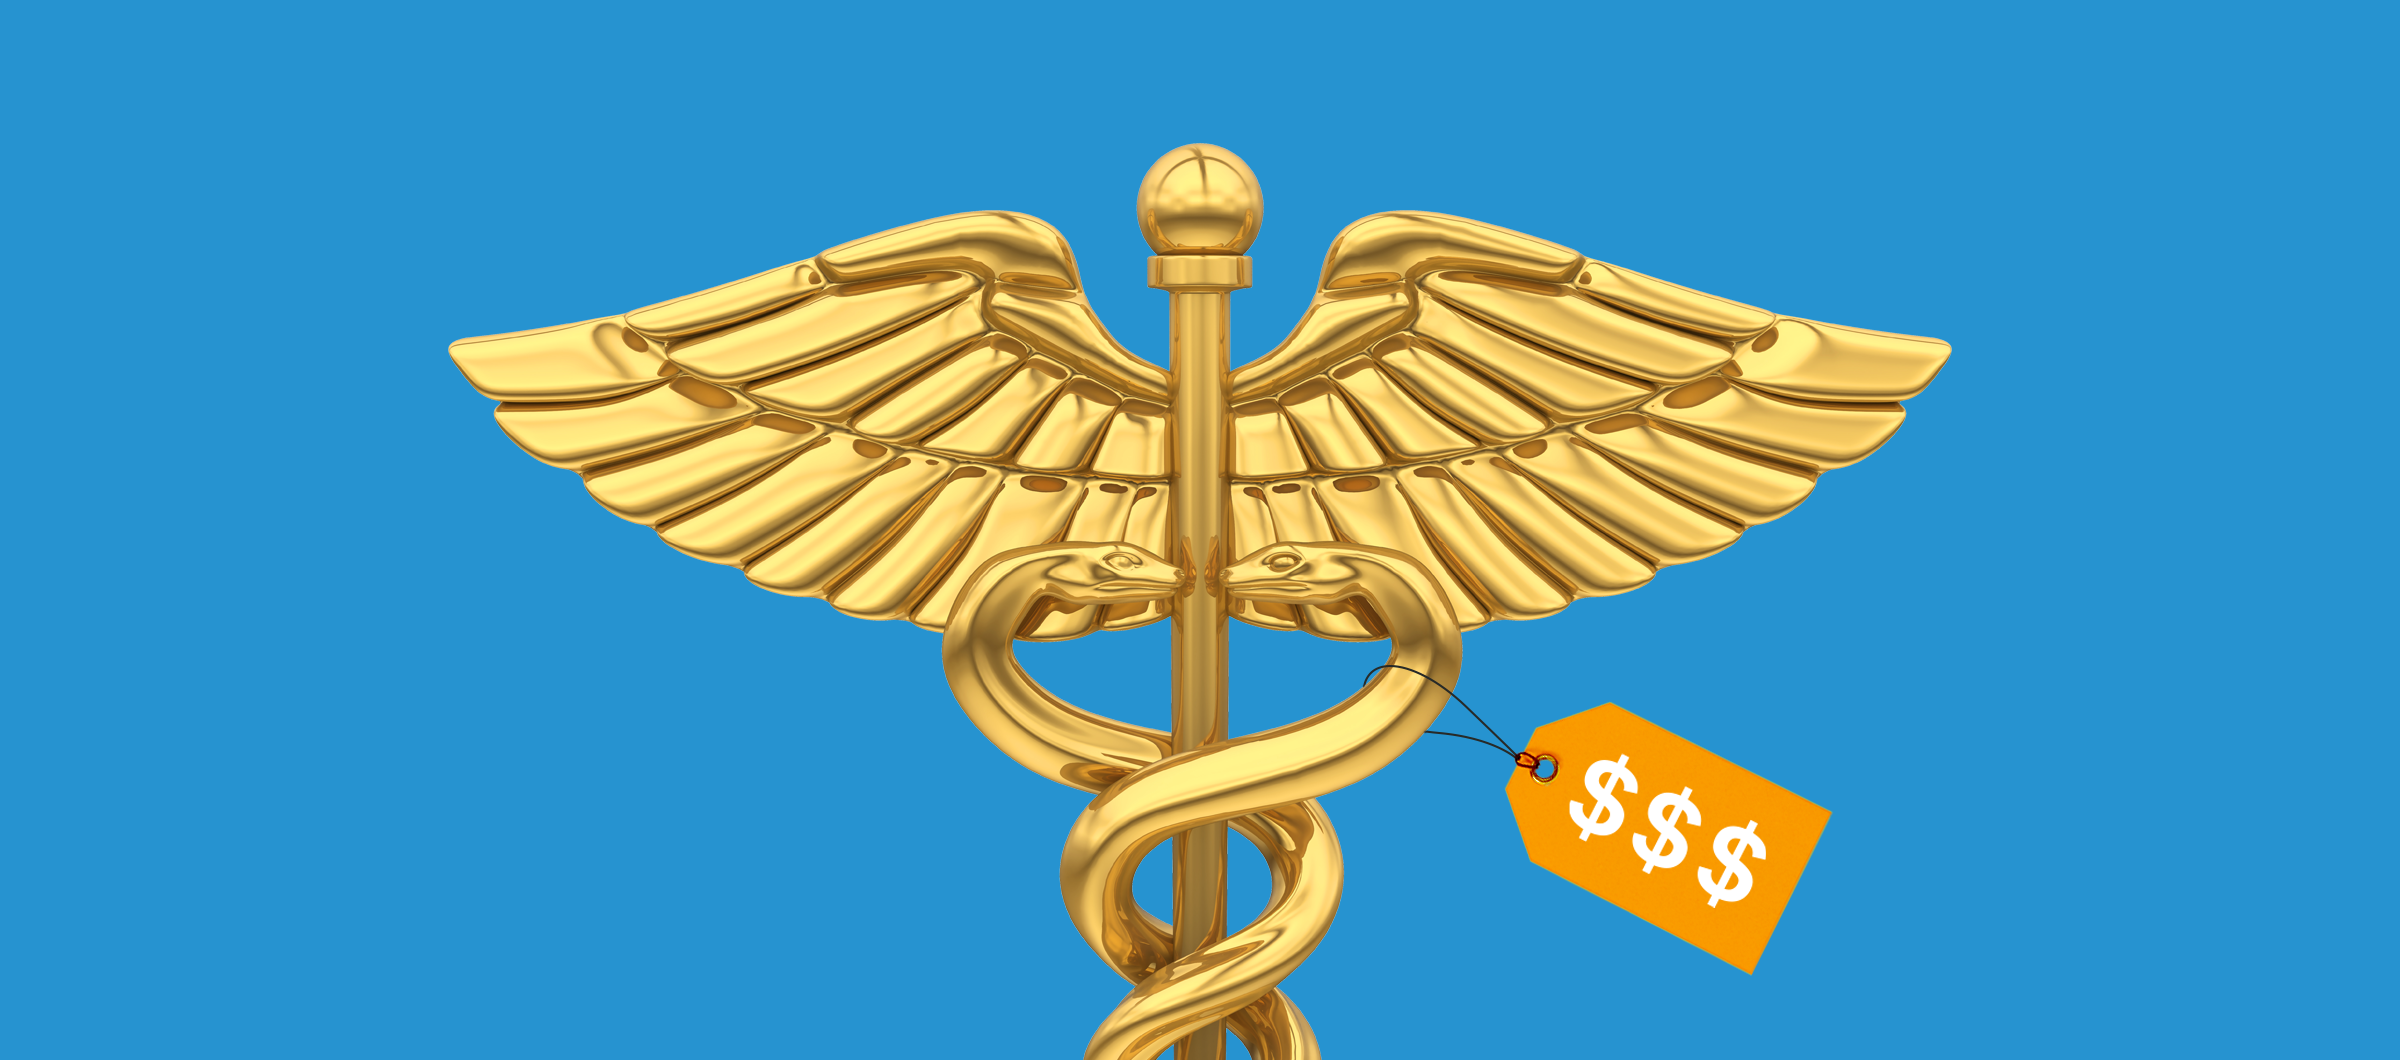 The High Cost of the High Cost of Care